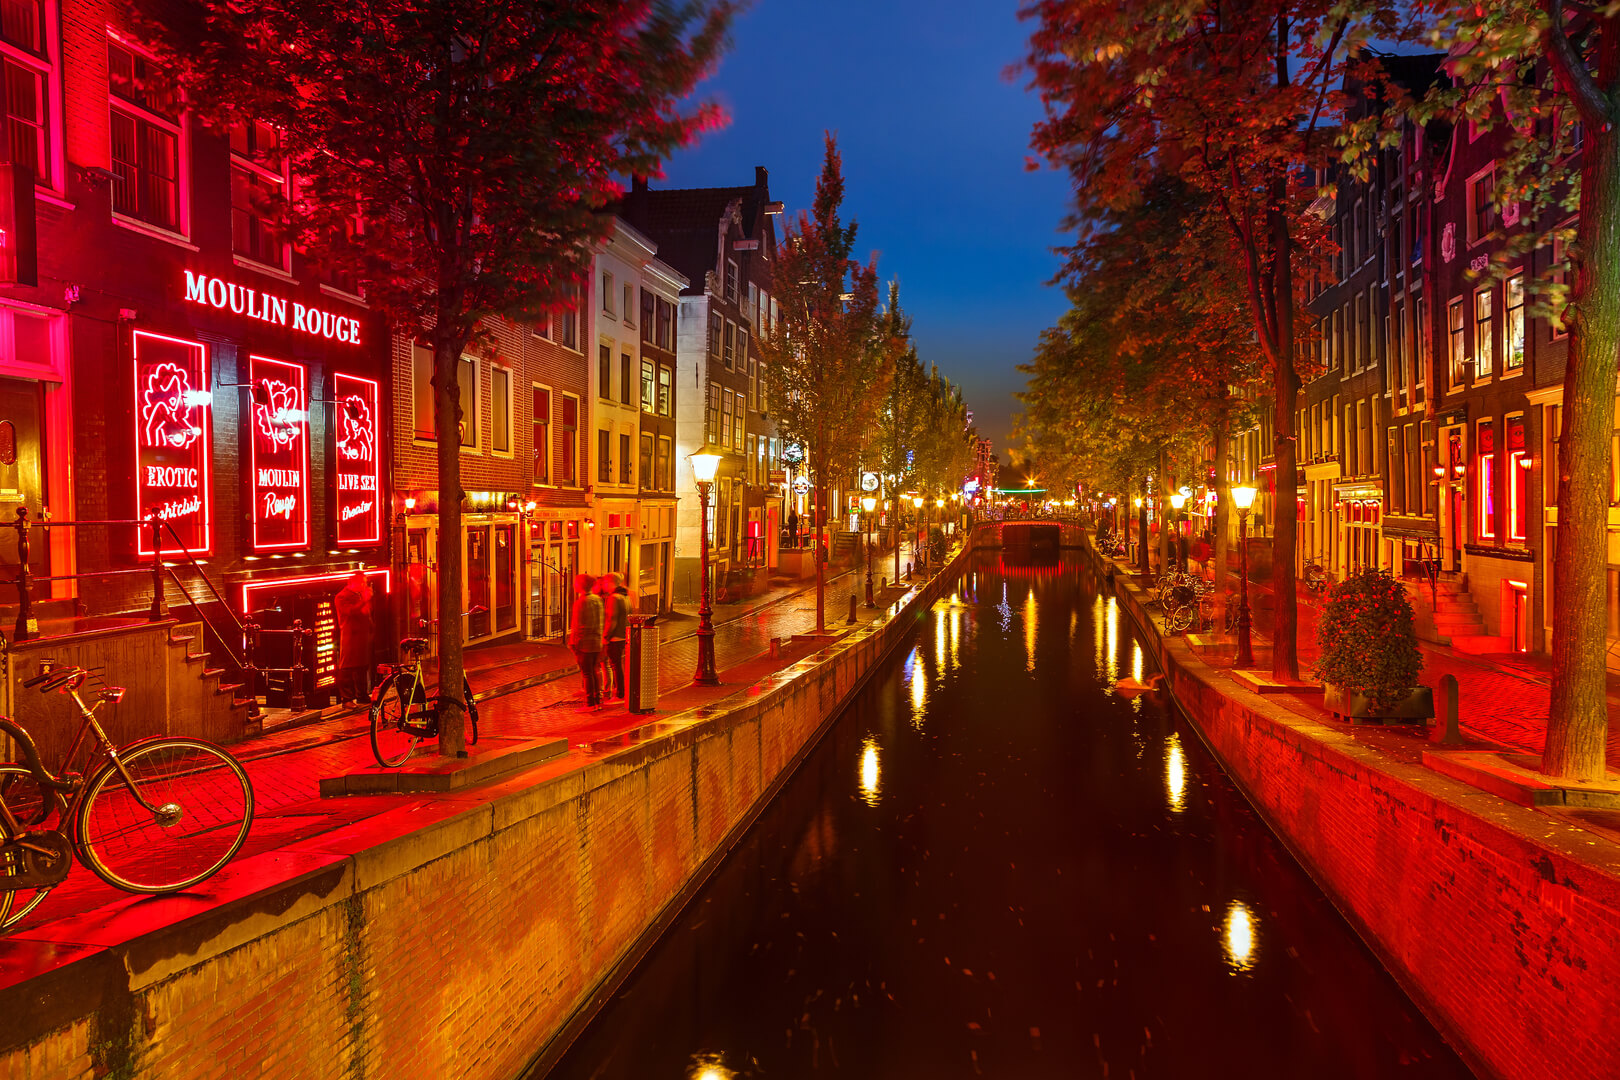 Red-light district in Amsterdam in Amsterdam, Netherlands. There are about three hundred cabins rented by prostitutes in the area.